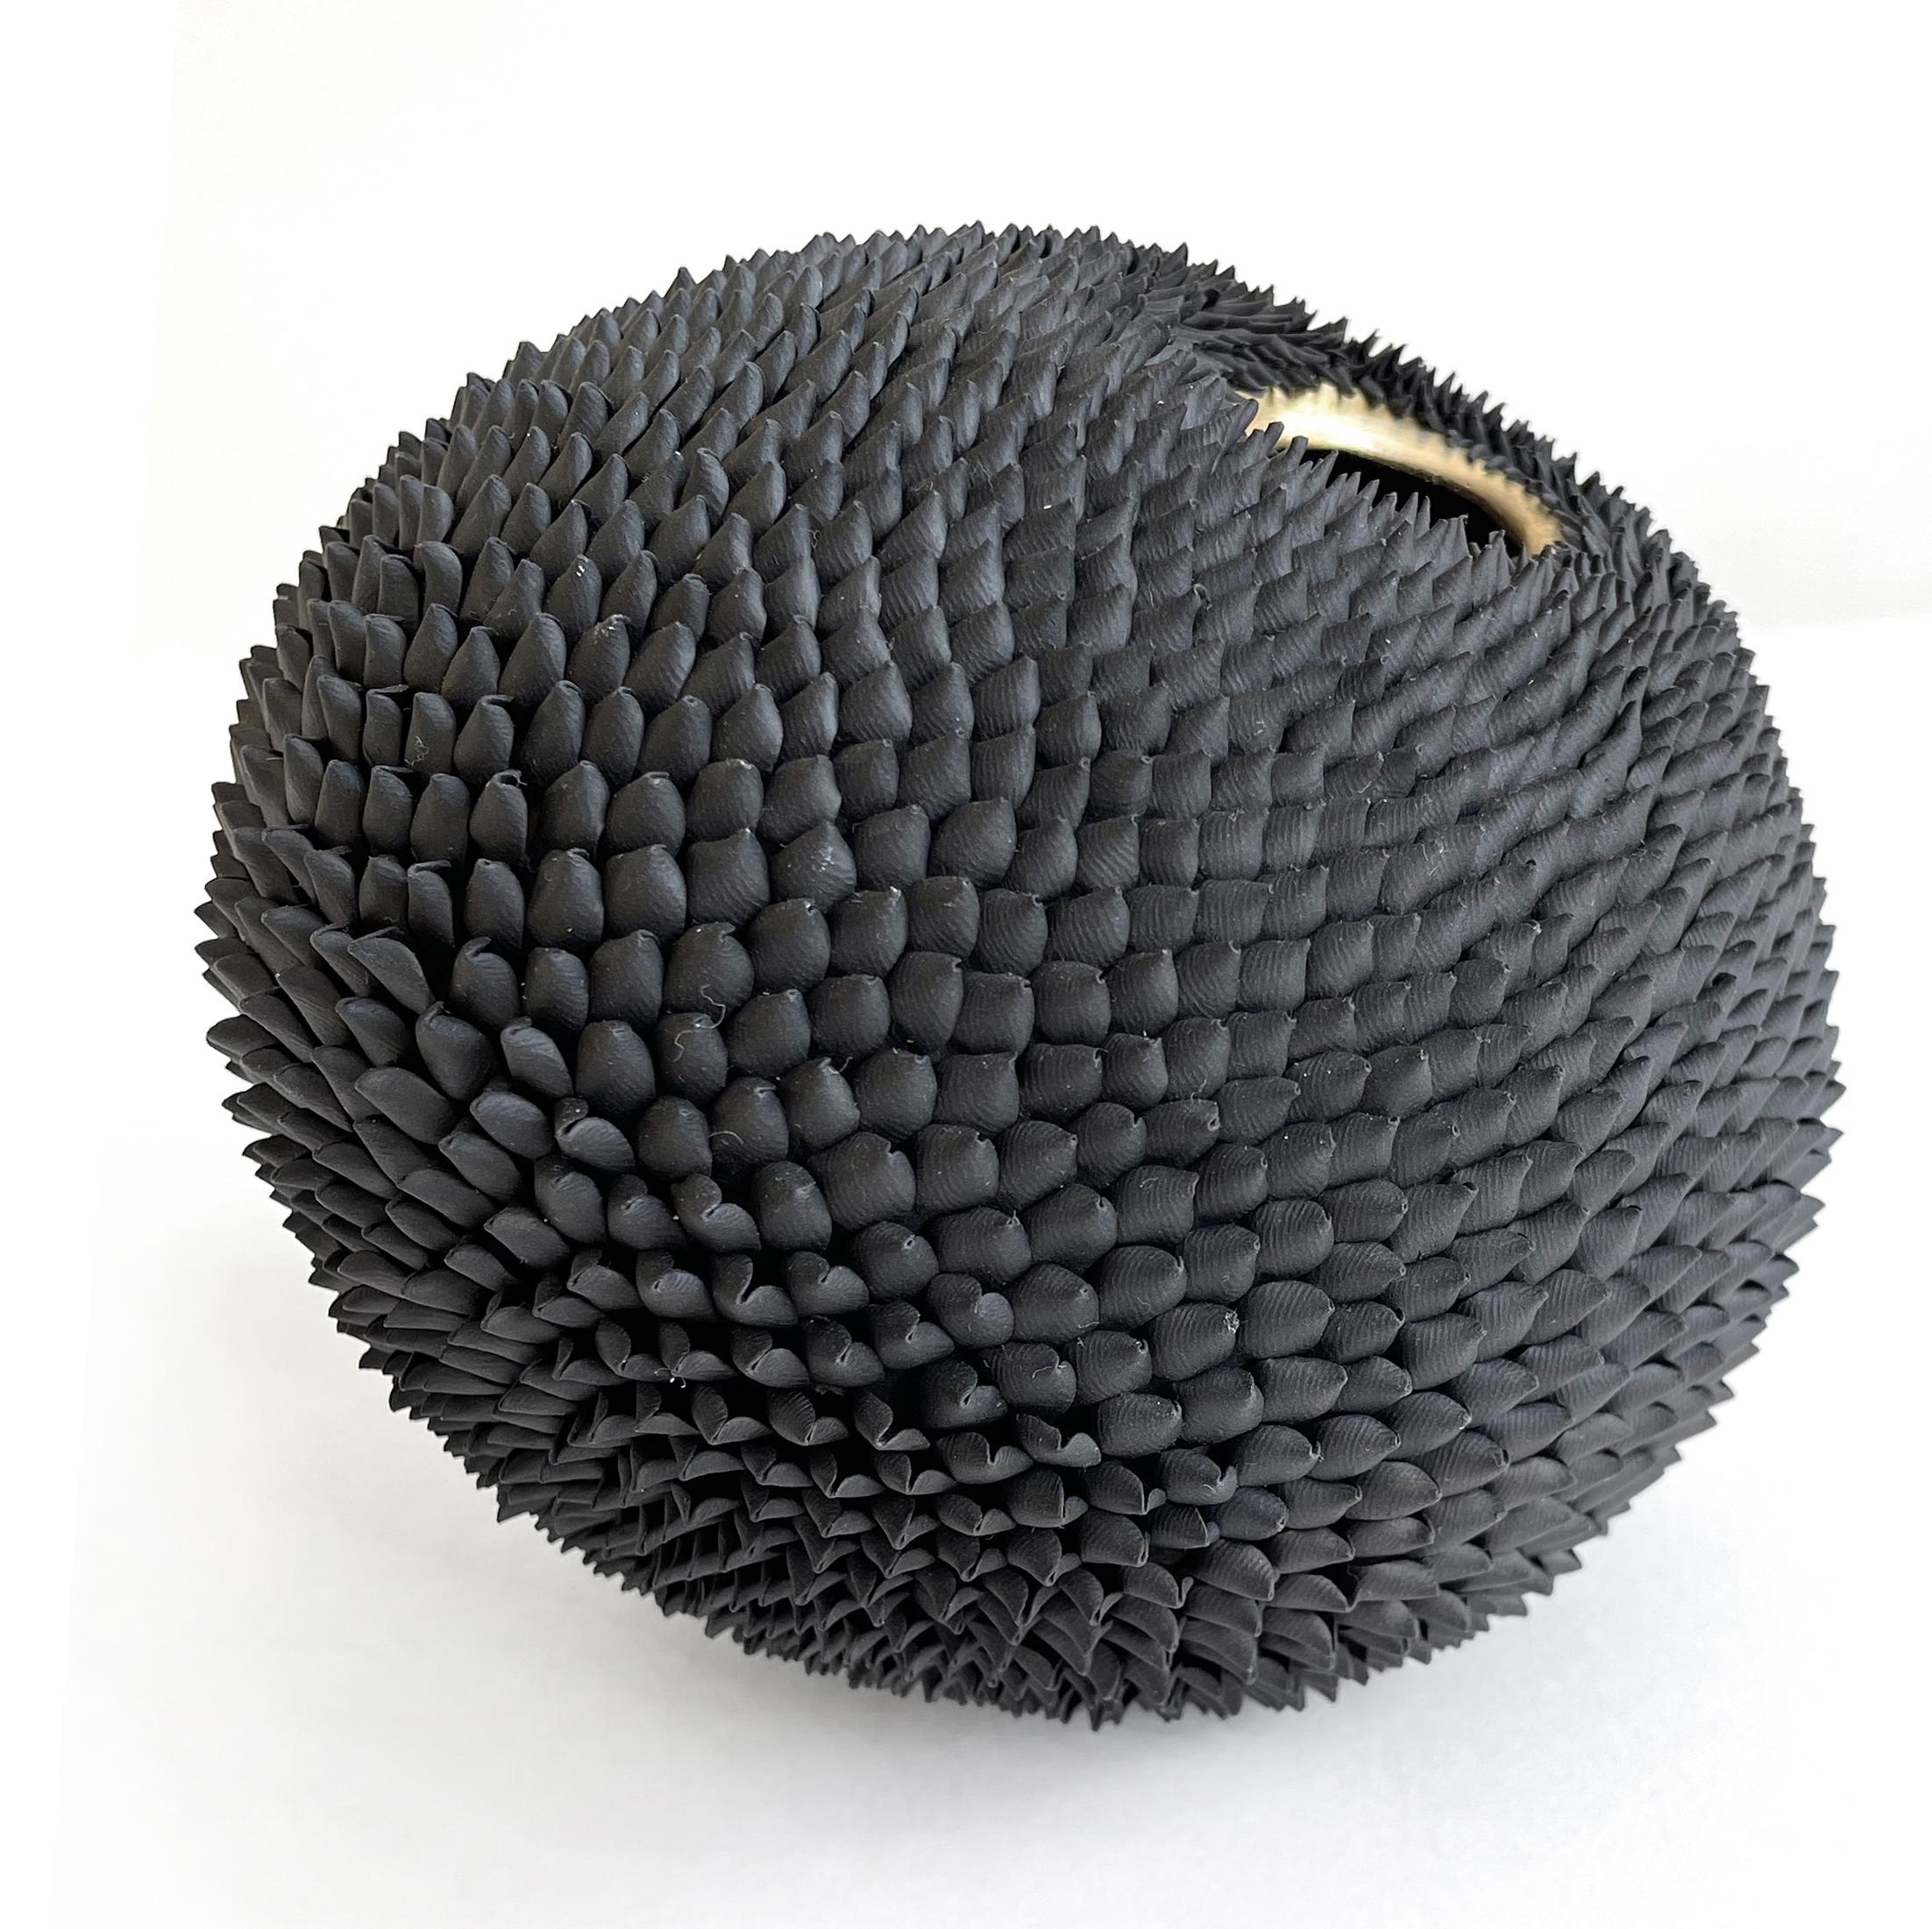 Black seed - small free standing sculpture with clay on brass